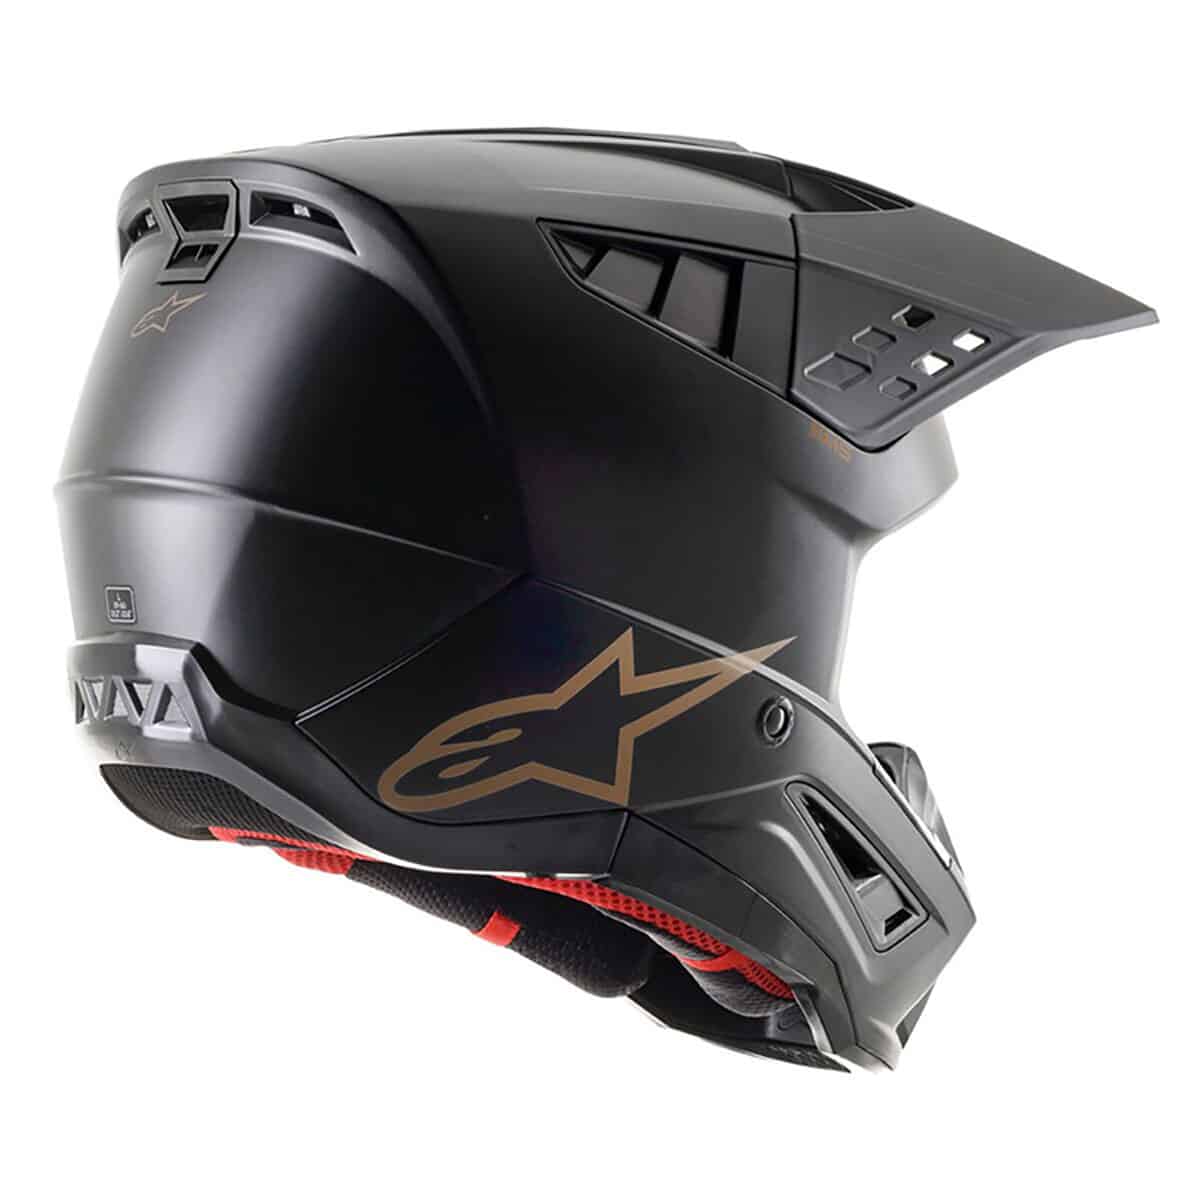 The masters of MX protection have crafted the ultimate MX Helmet: The Alpinestars SM5